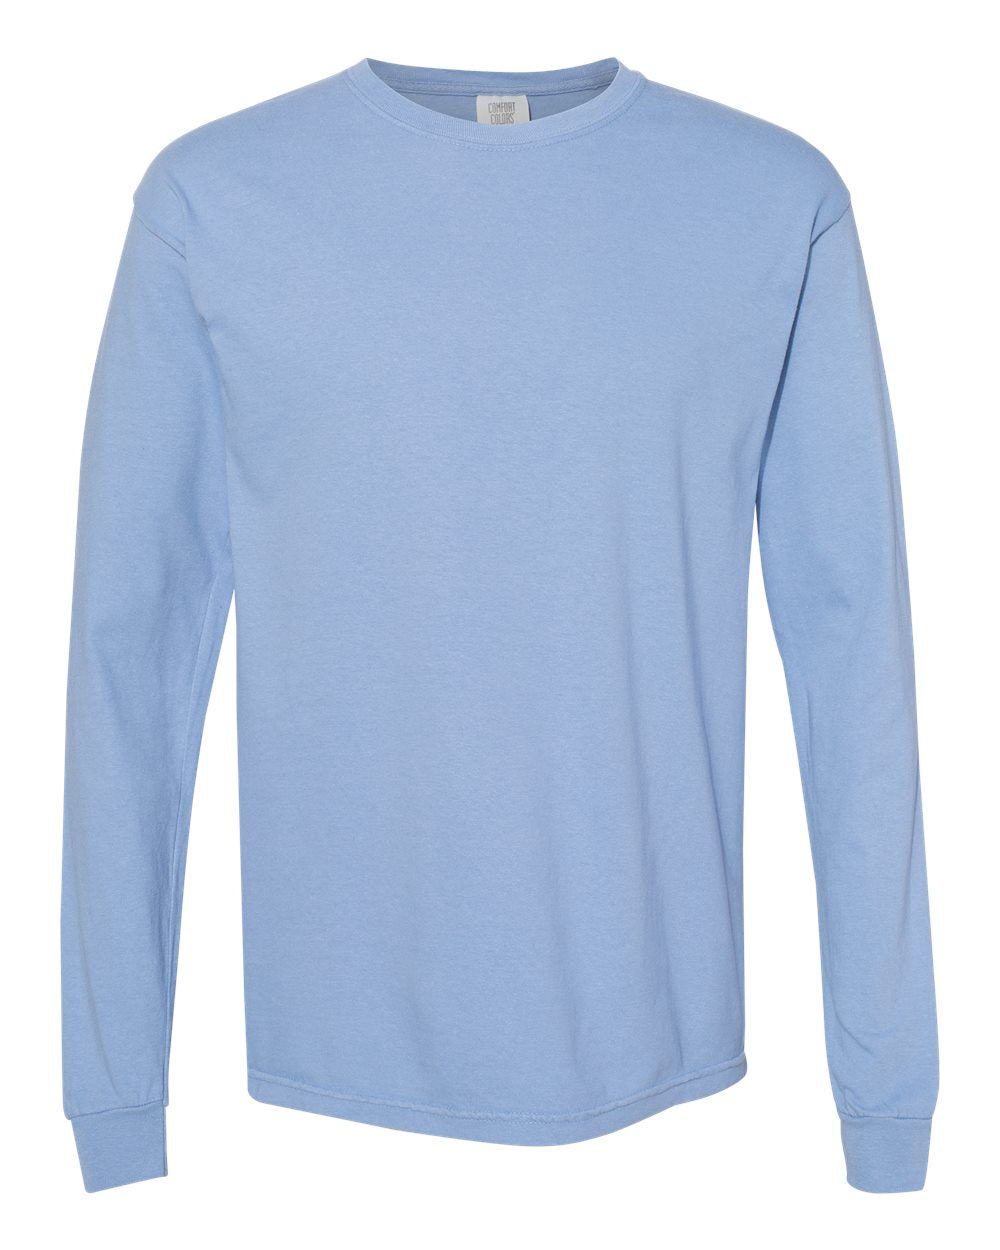 Comfort Colors Long Sleeve (6014) in Washed Denim